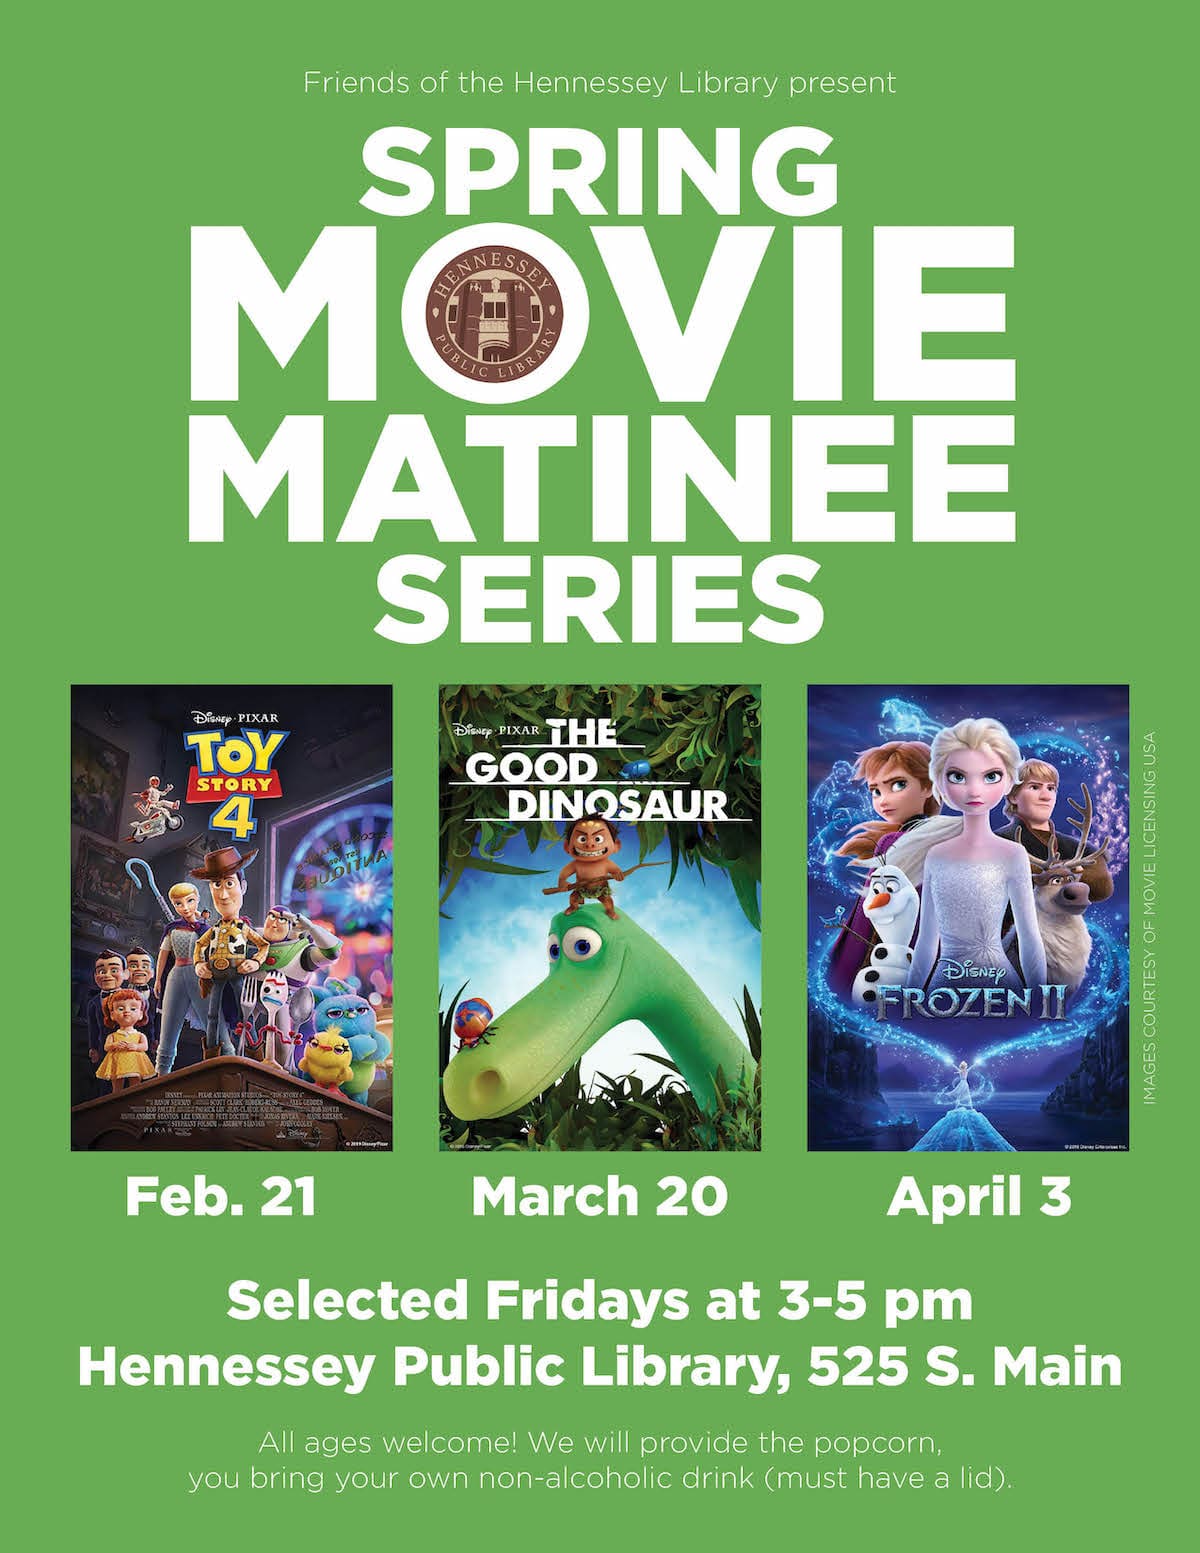 HENNESSEY LIBRARY SPRING MOVIE MATINEE SERIES